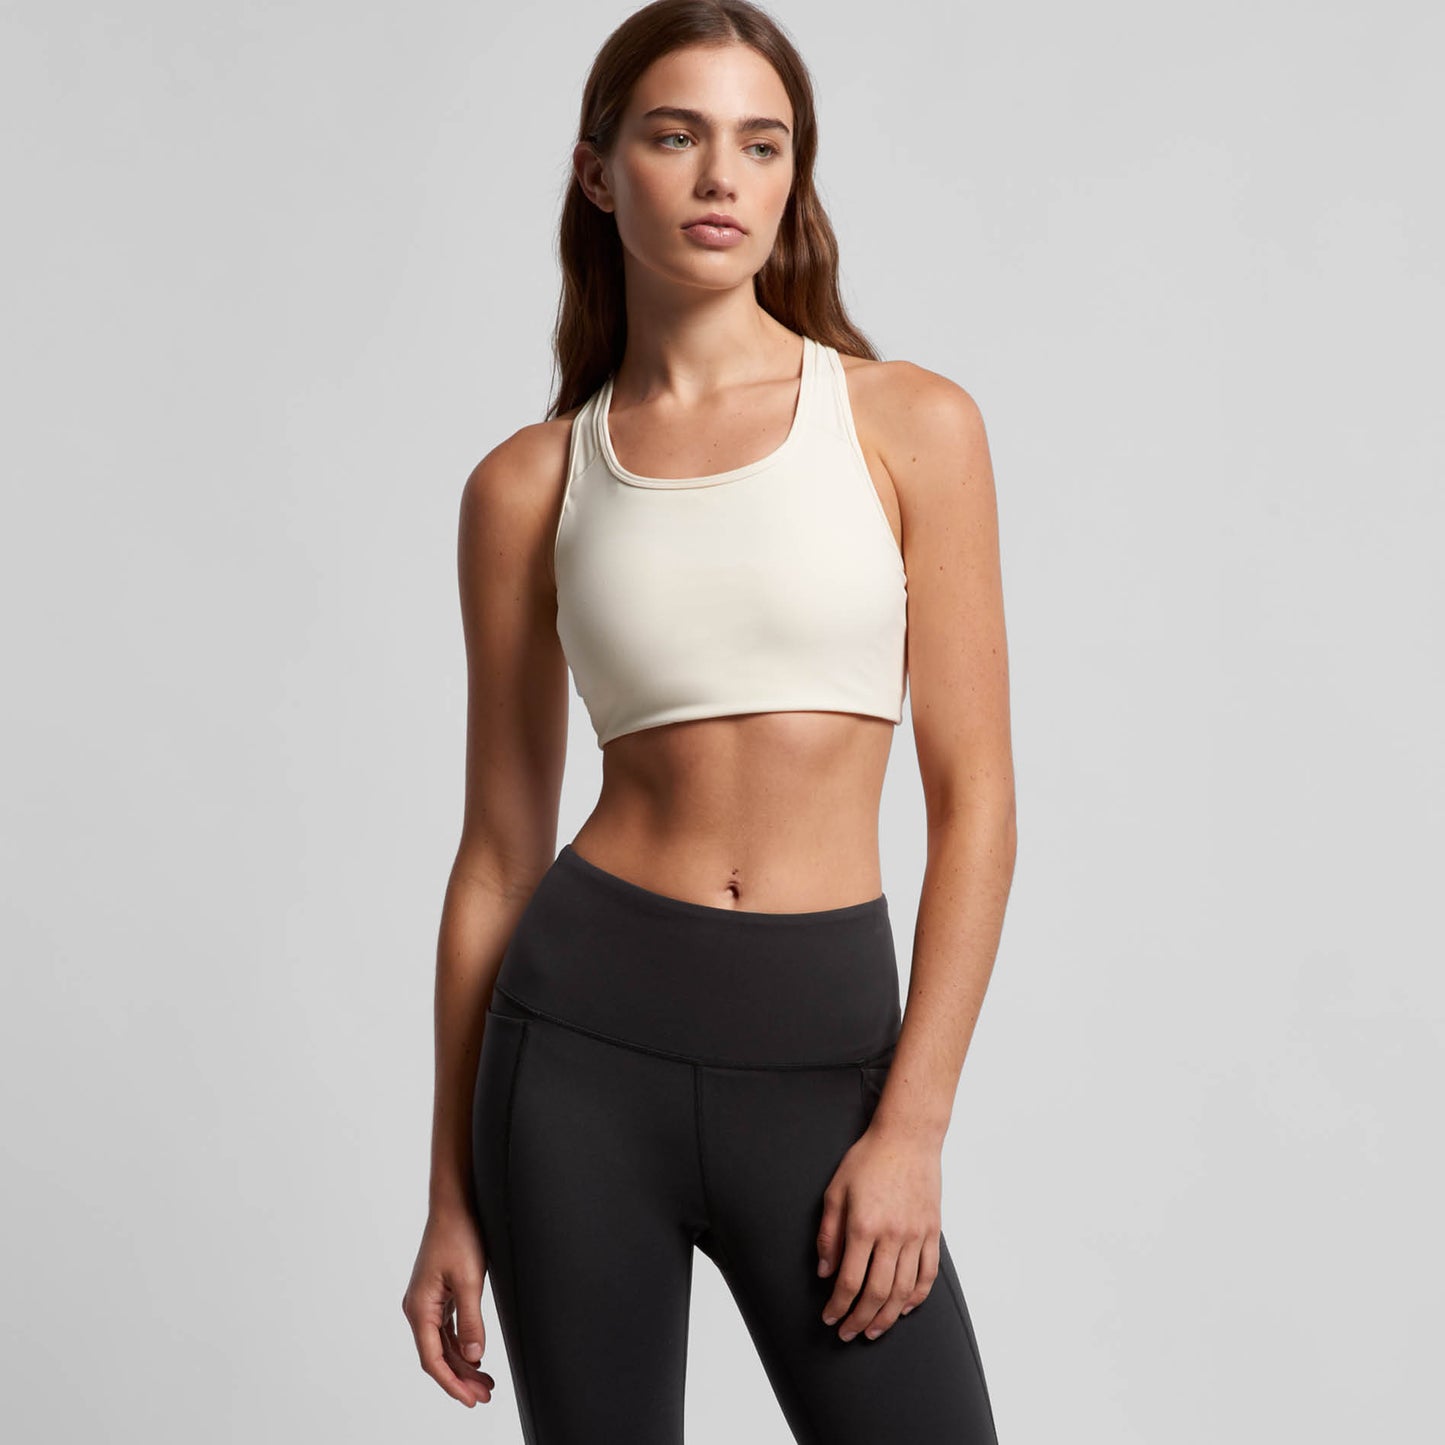 "Edible" Embroidered Women's Active Sports Bra